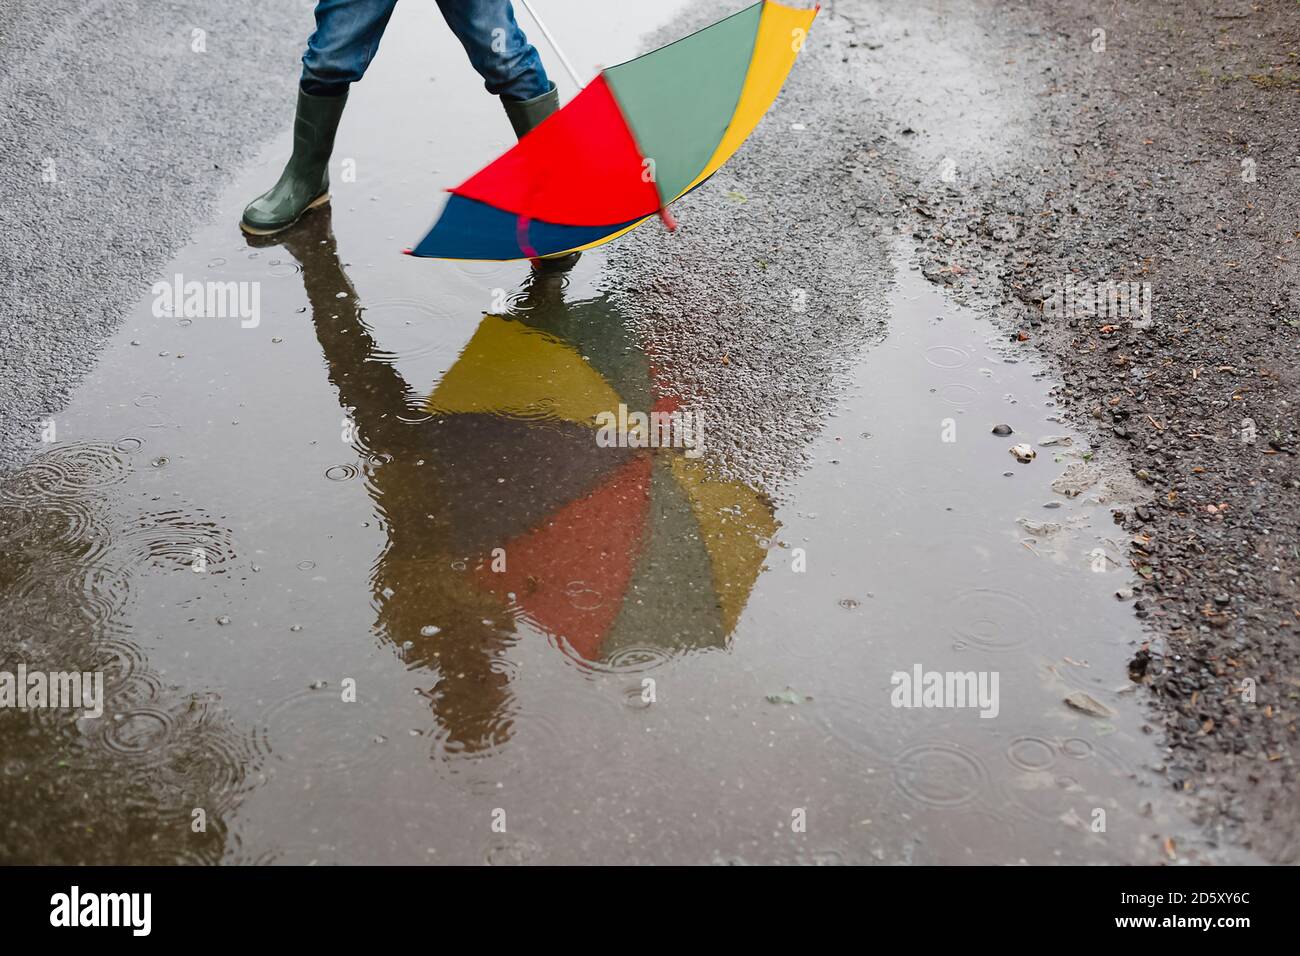 Little boy with umbrella and rubber boots standing in a puddle, partial view Stock Photo